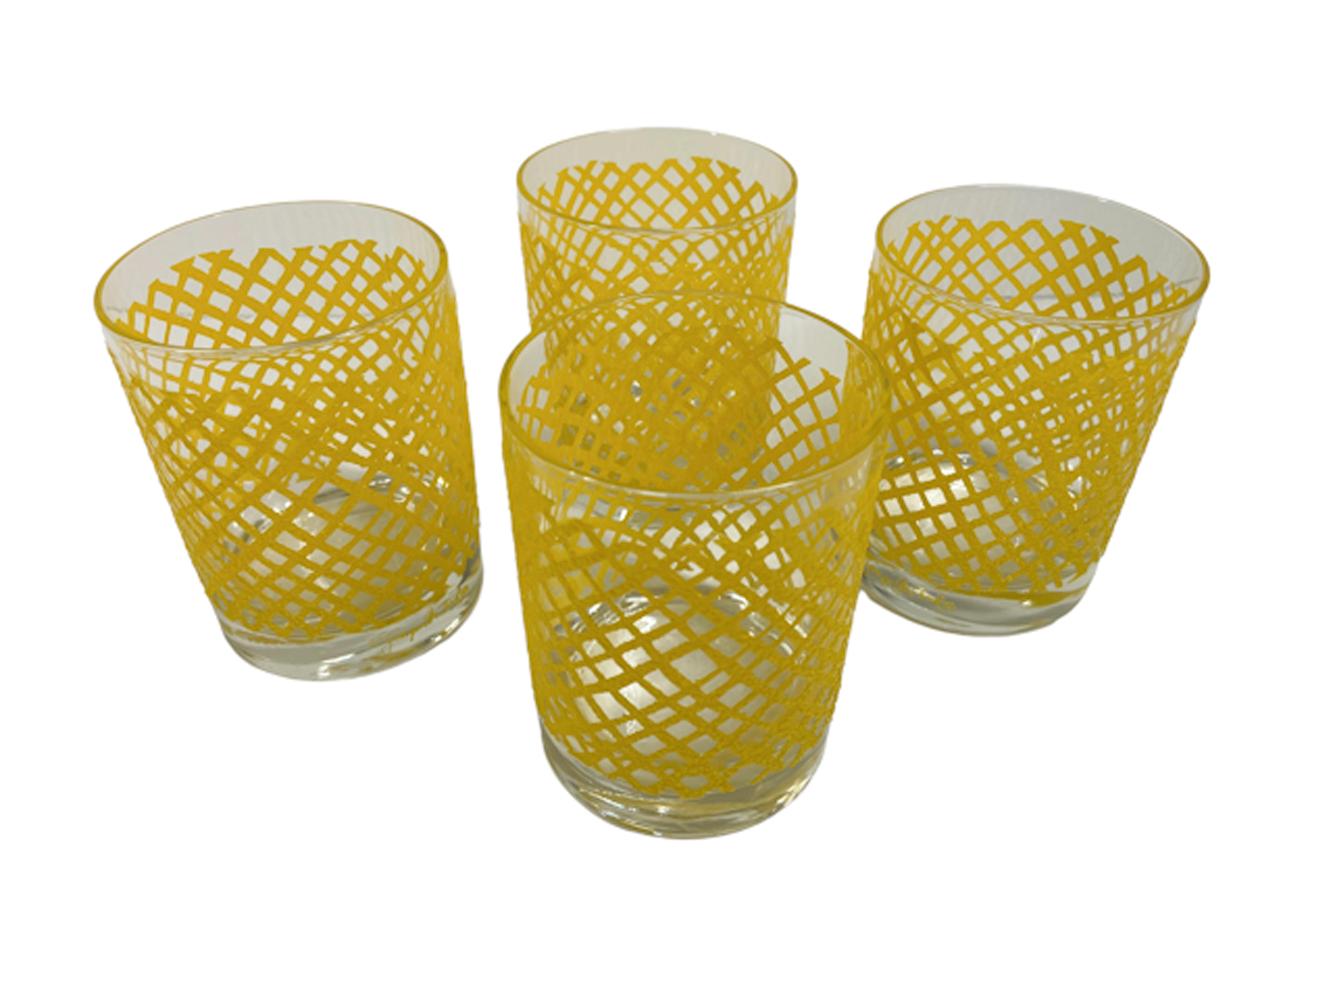 Four Georges Briard rocks glasses with raised and textured irregular yellow net pattern with a non-slip surface.